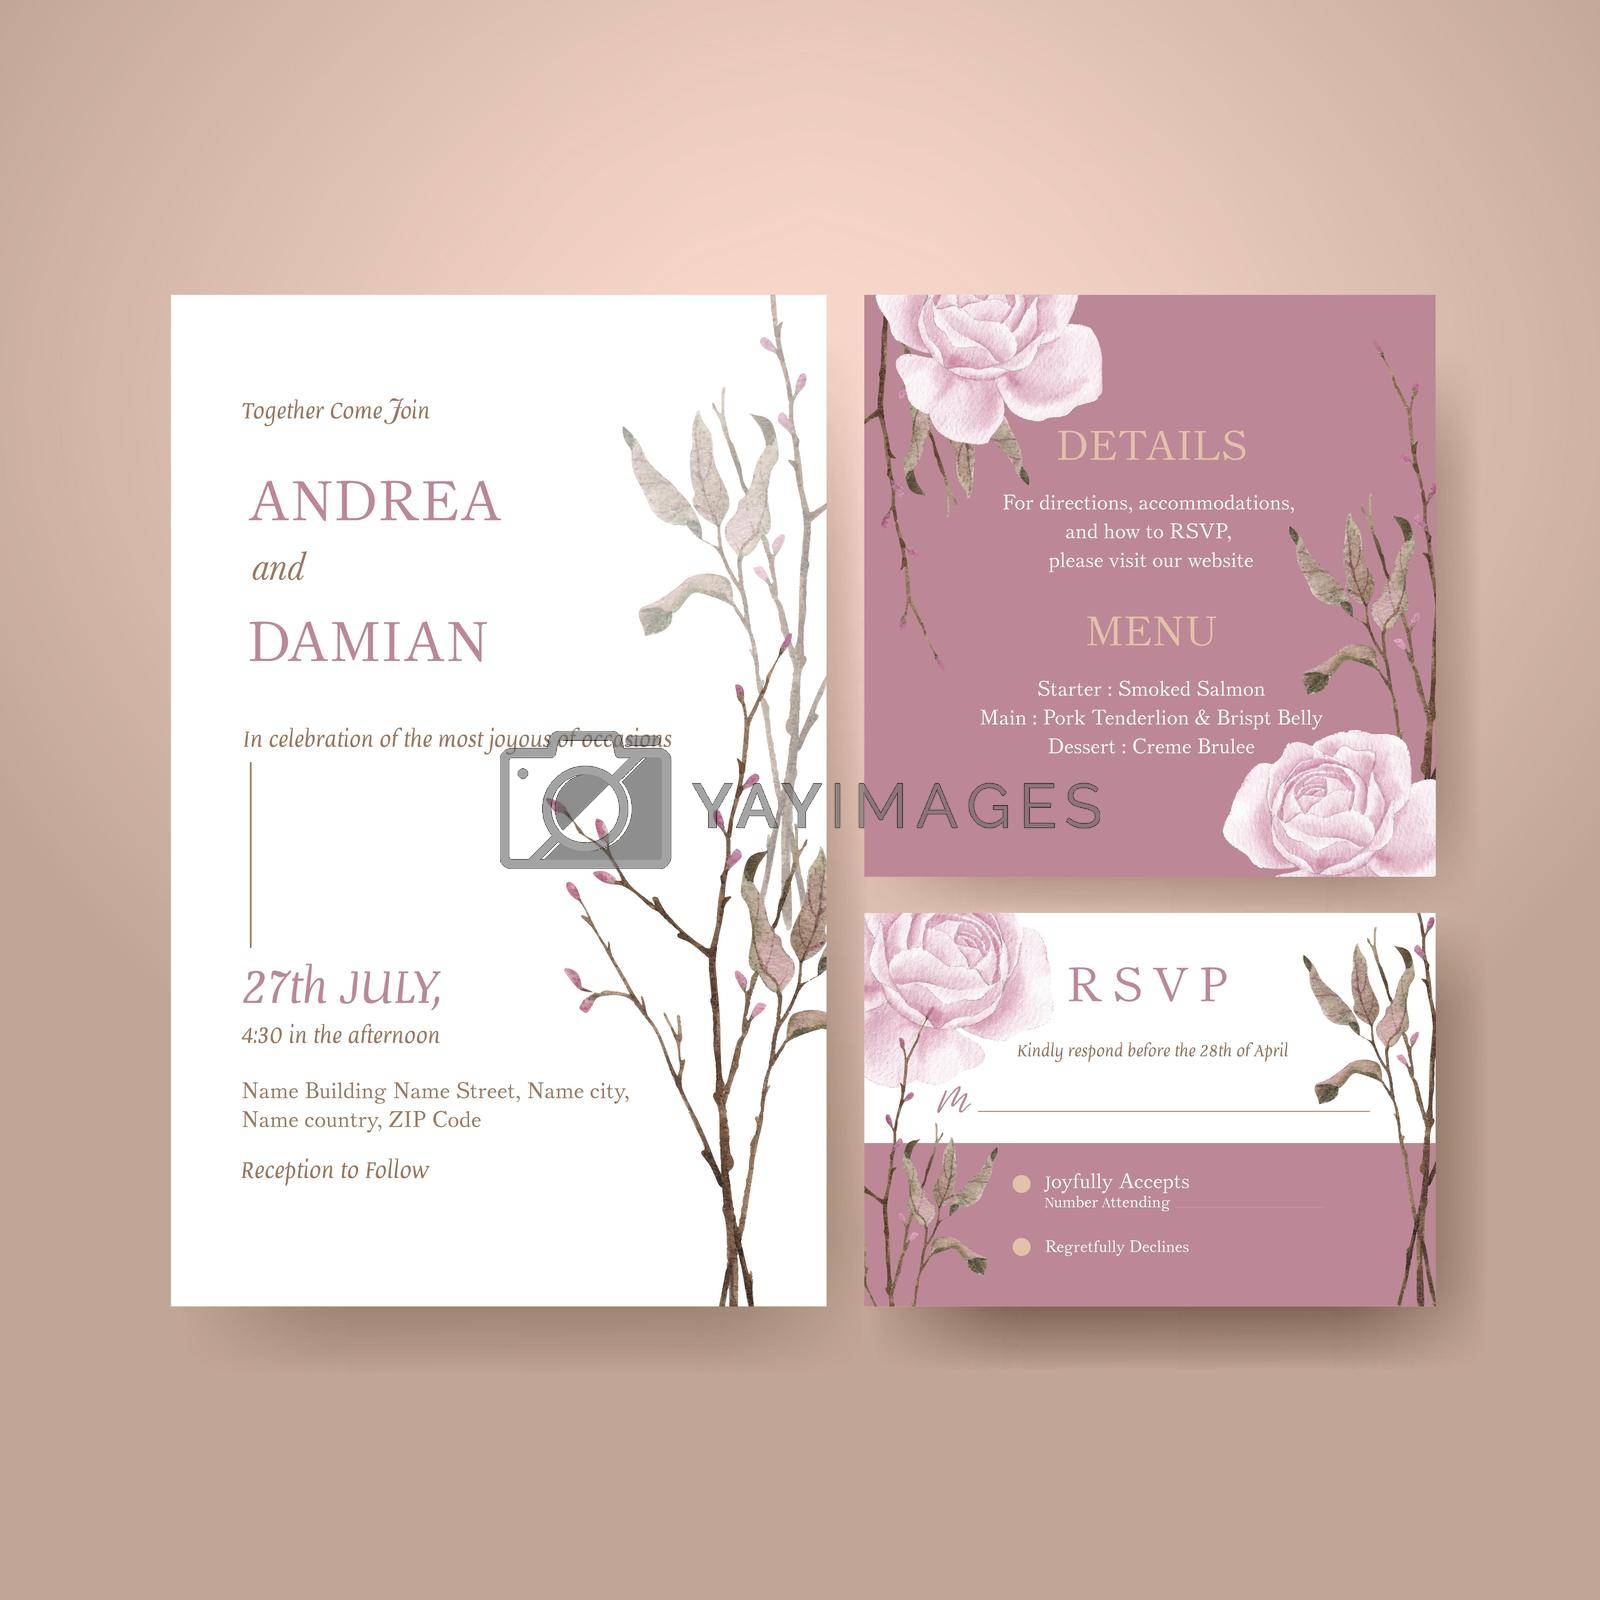 Royalty free image of Wedding card template with lilac violet wedding concept,watercolor style by Photographeeasia